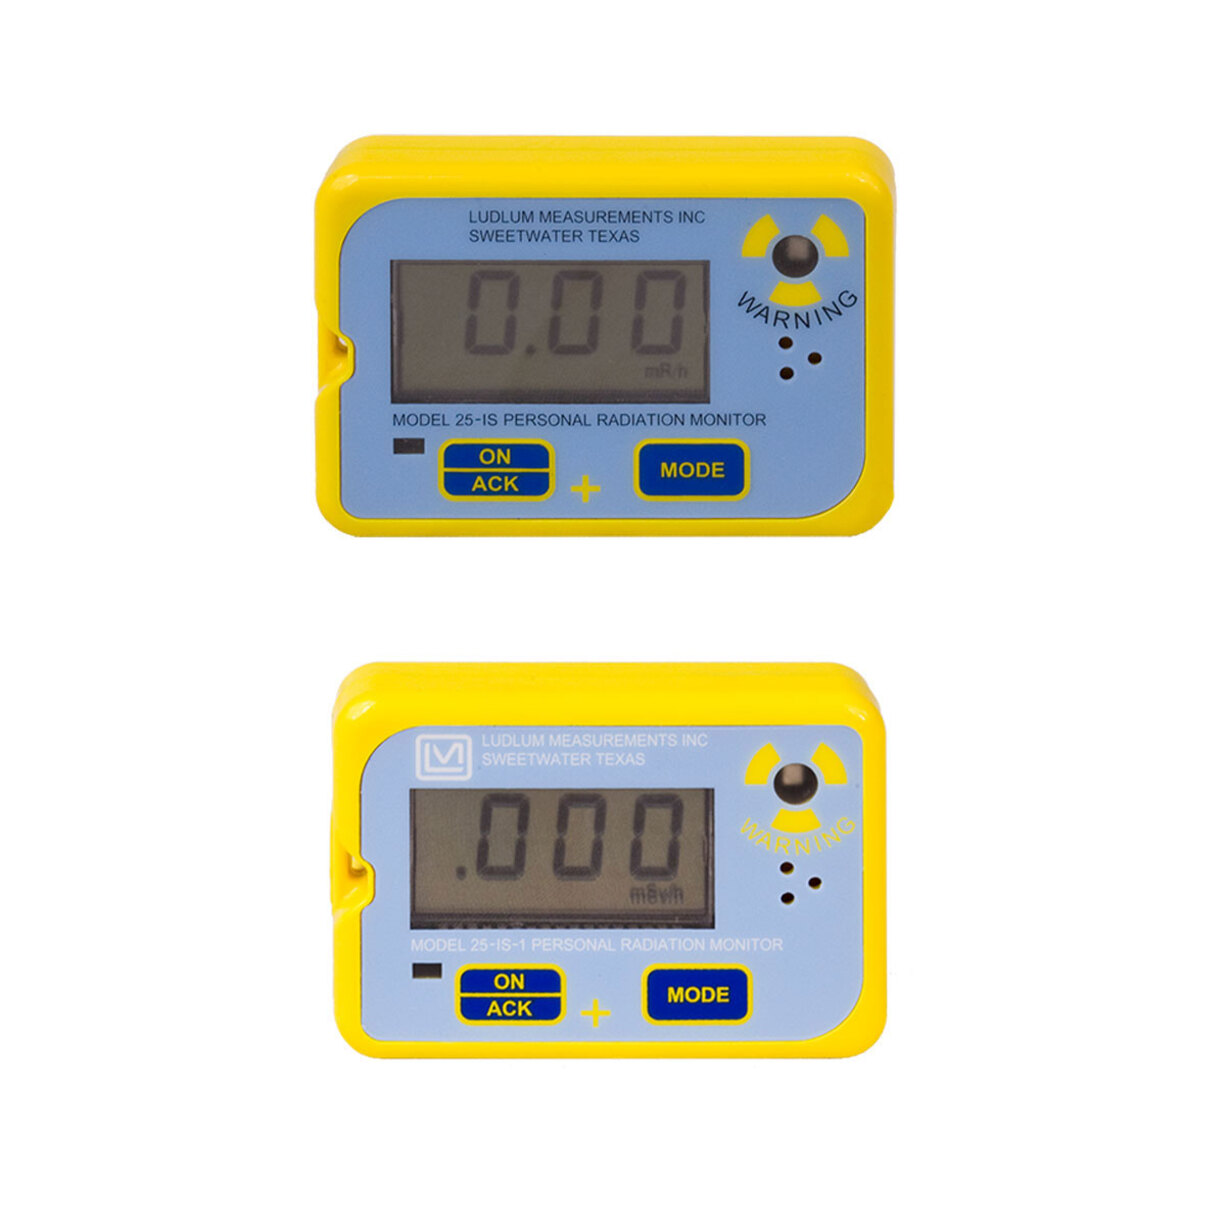 Model 25-IS Series Intrinsically Safe Personal Radiation Monitor